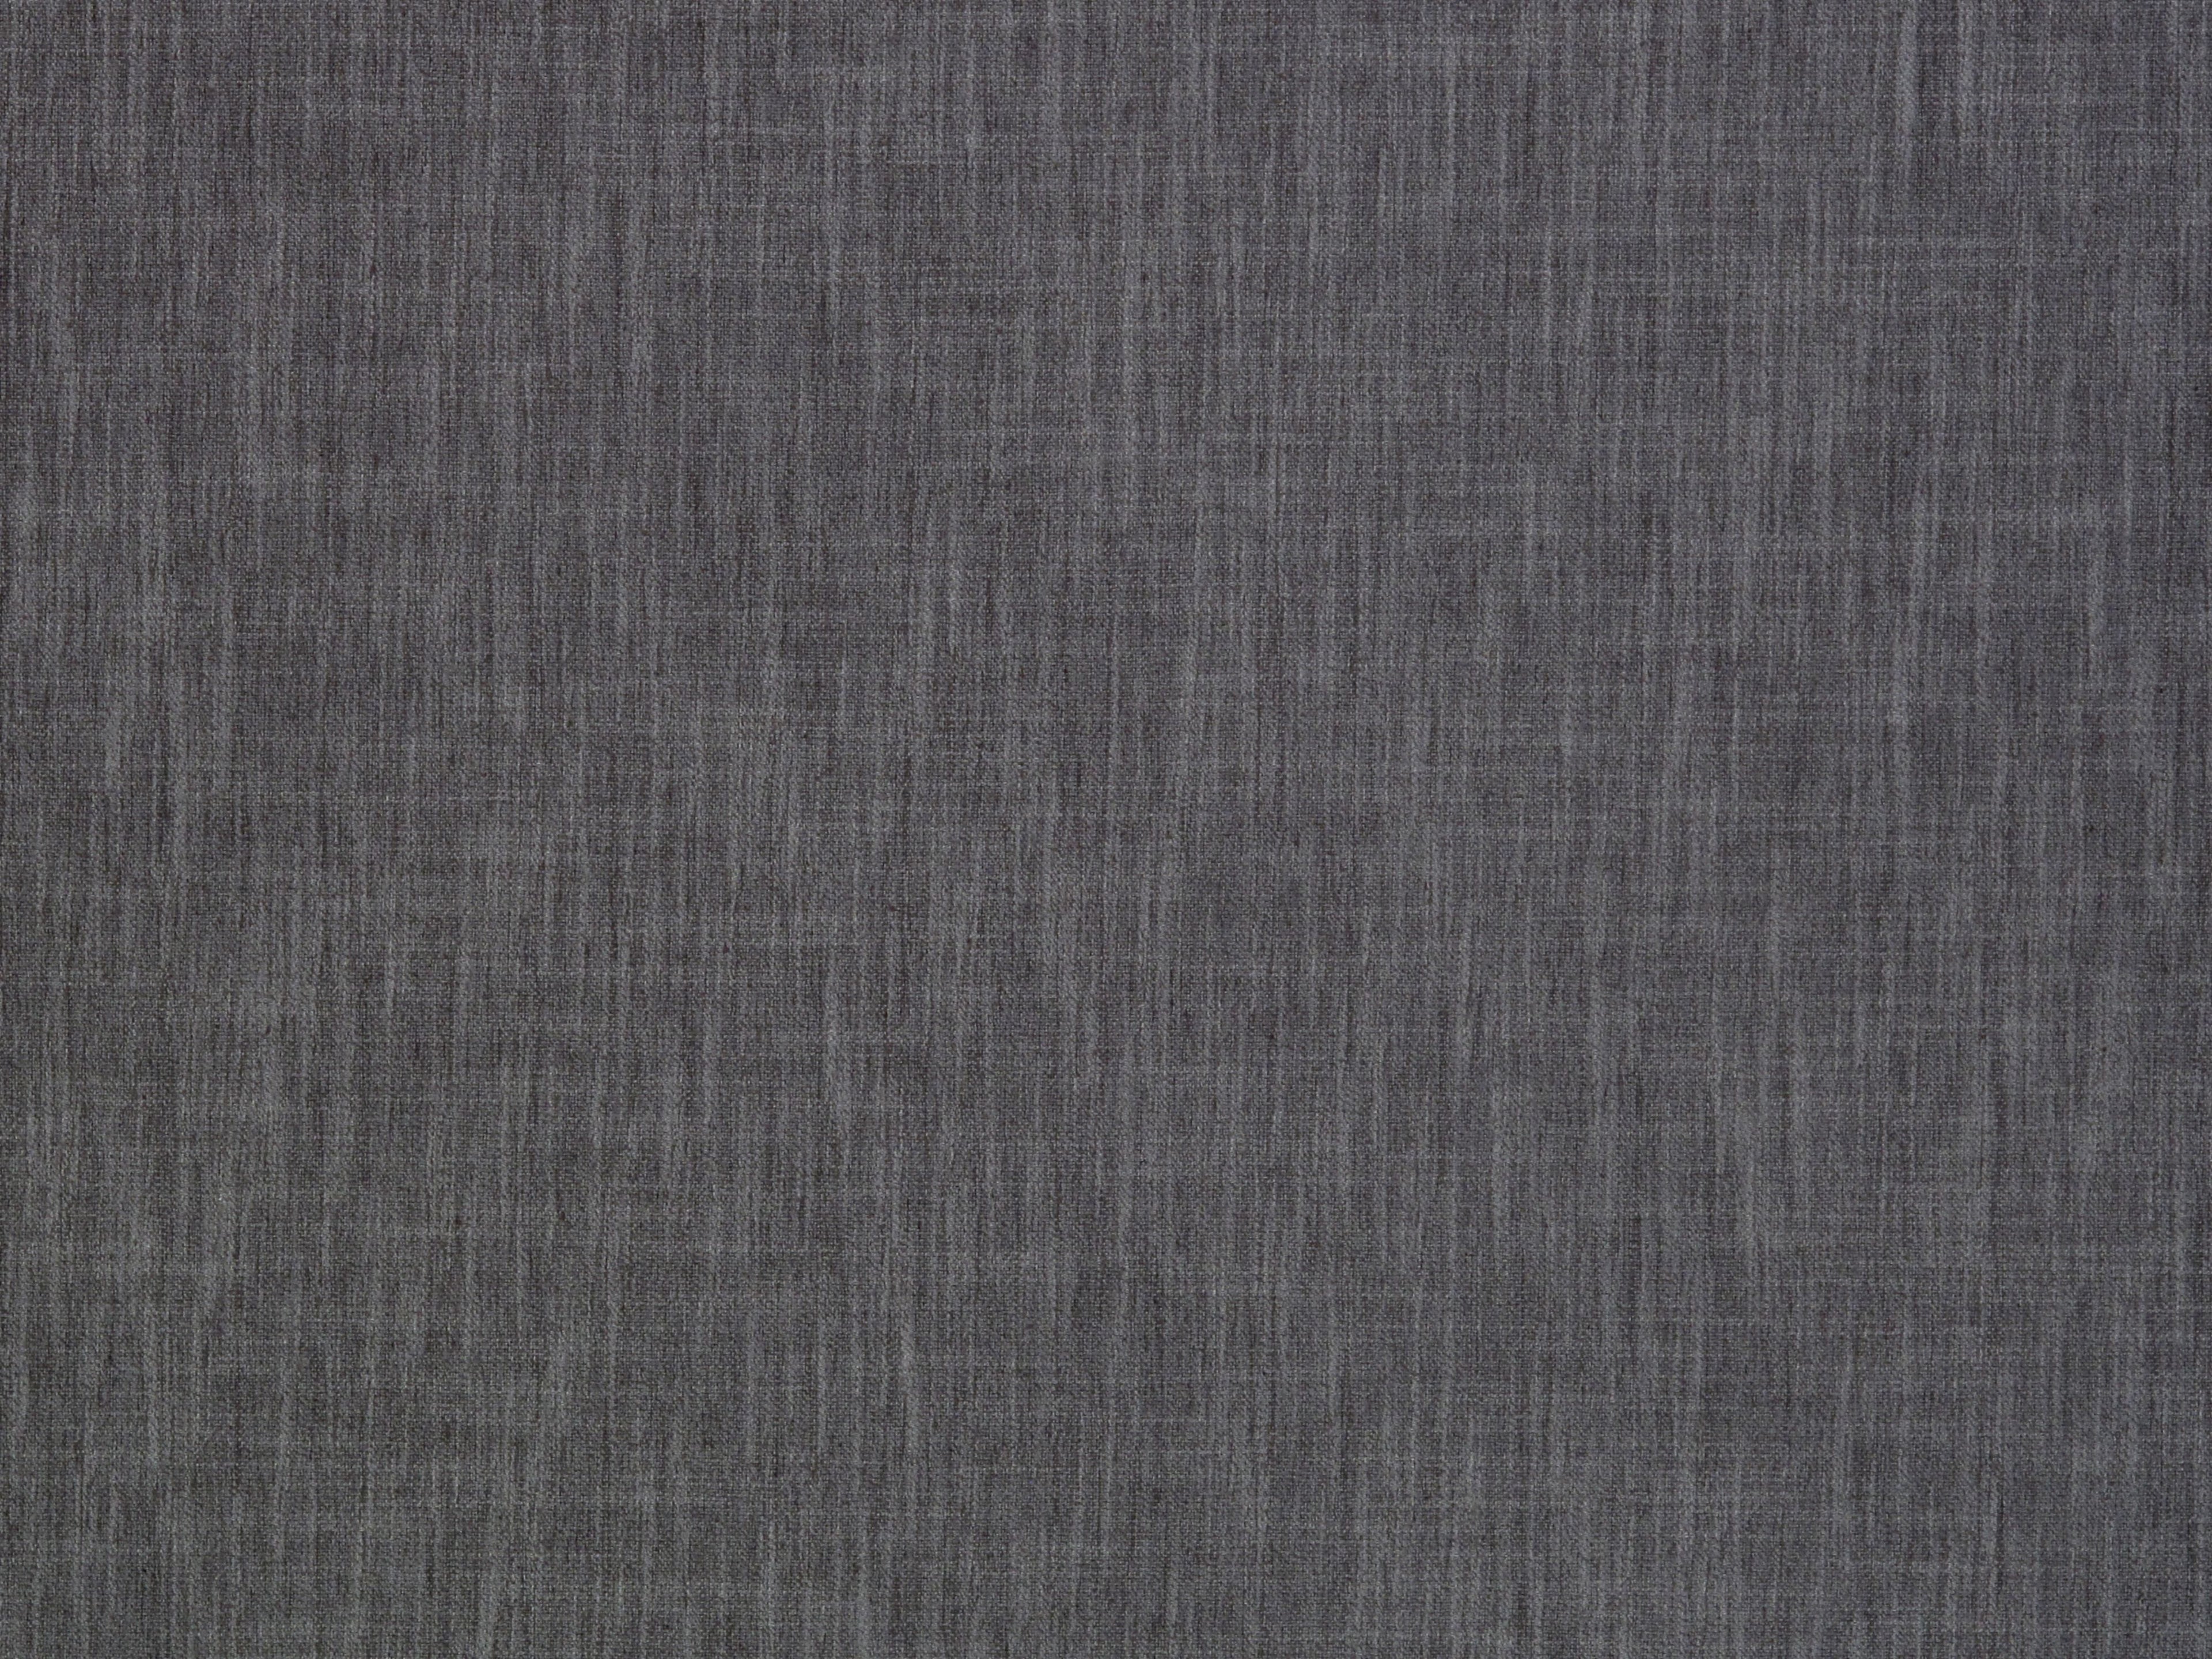 Flax fabric in cobblestone color - pattern number H6 0013FLAX - by Scalamandre in the Old World Weavers collection